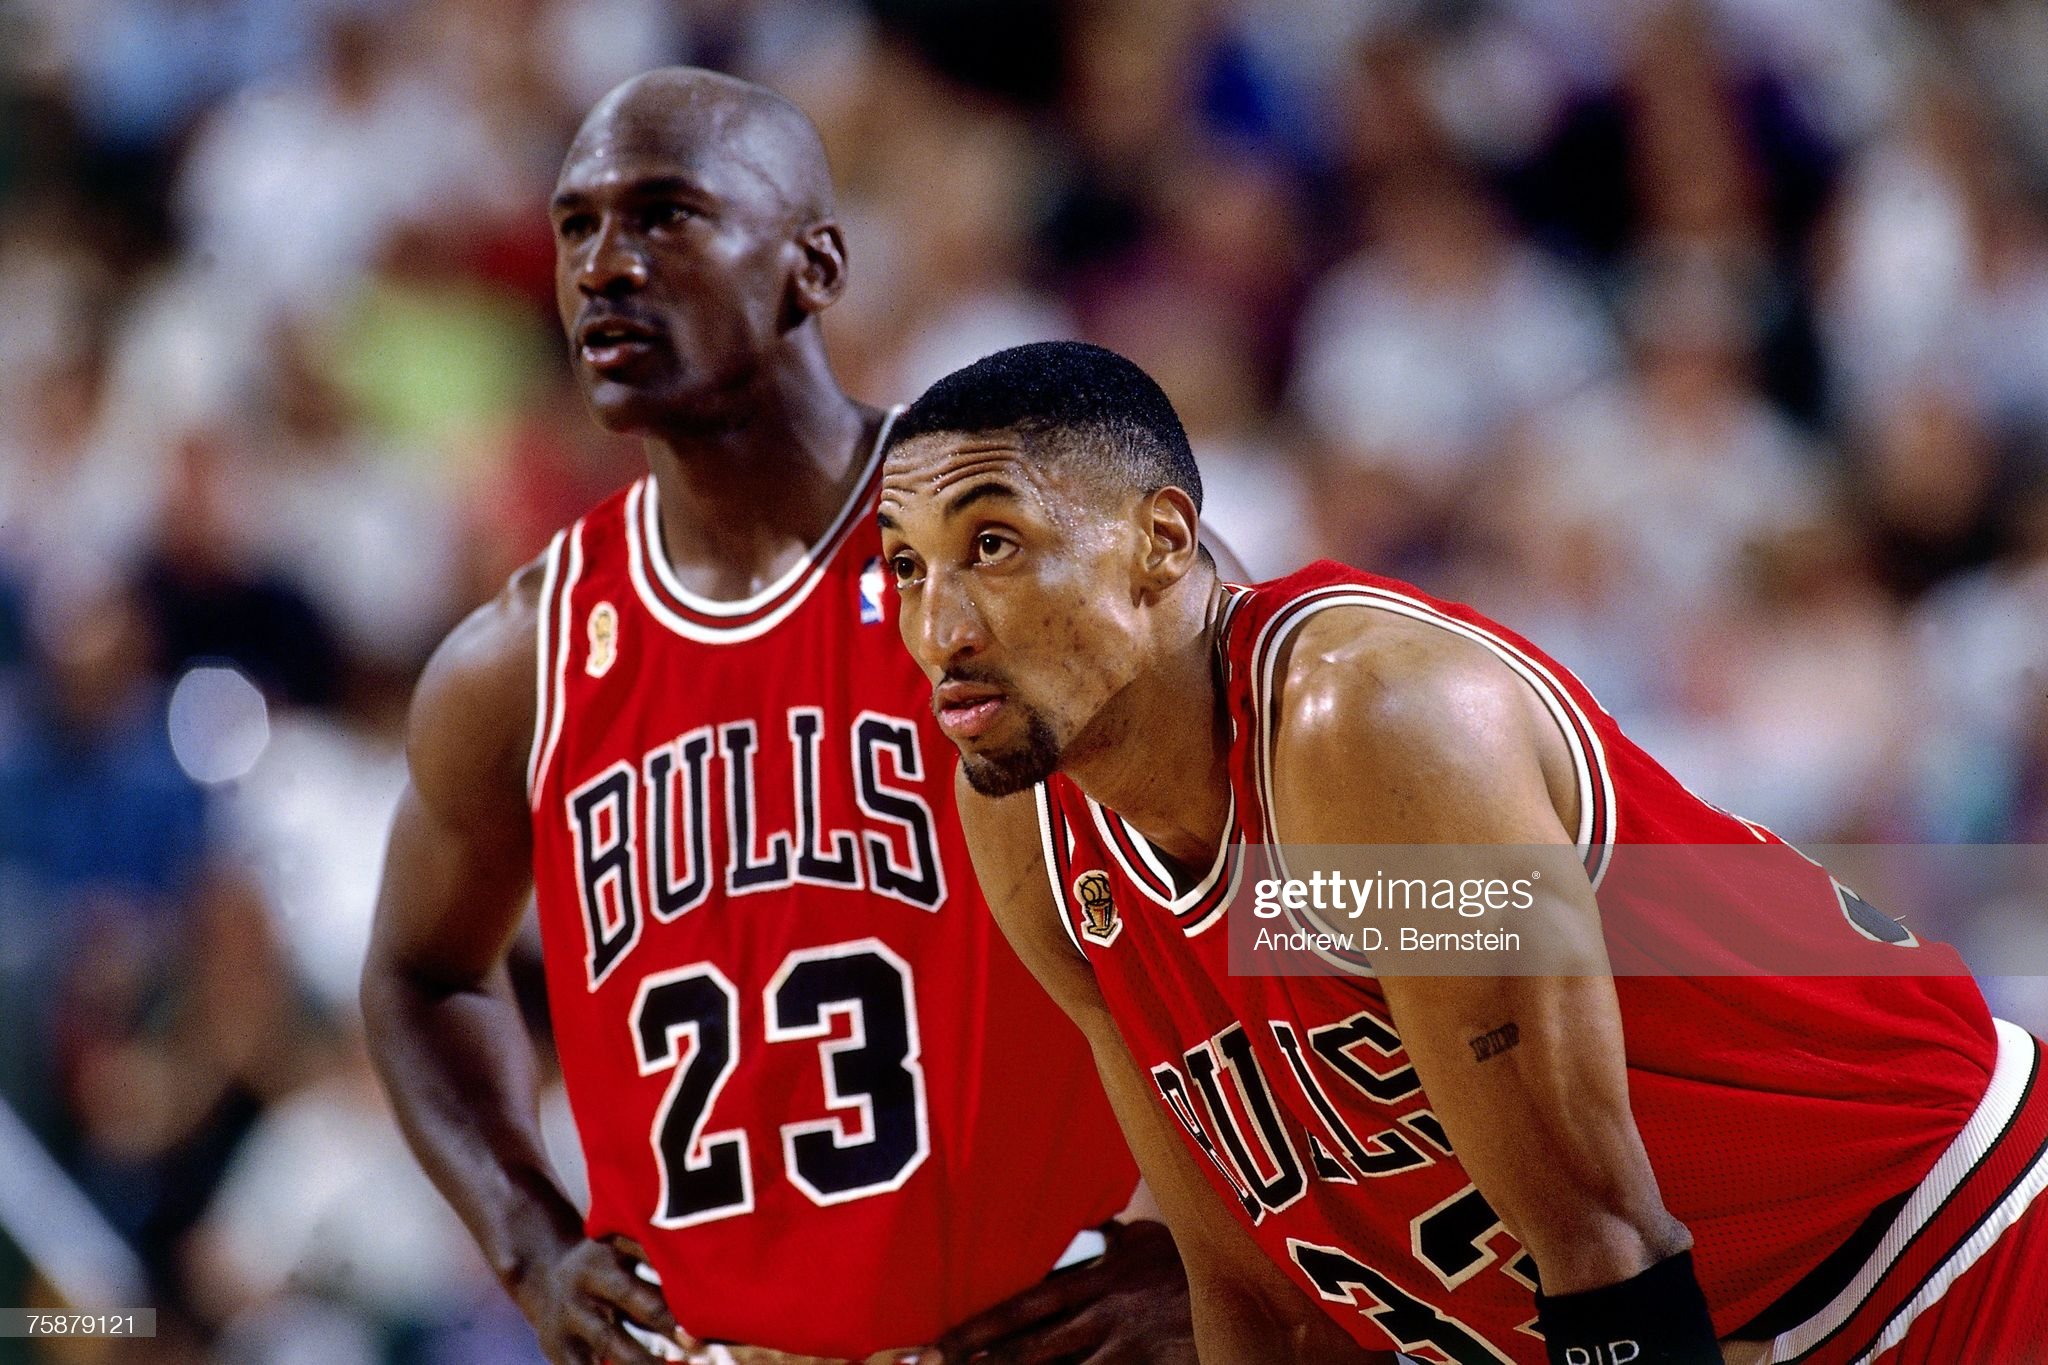 Michael Jordan and Scottie Pippen of the Chicago Bulls catch their. News Photo